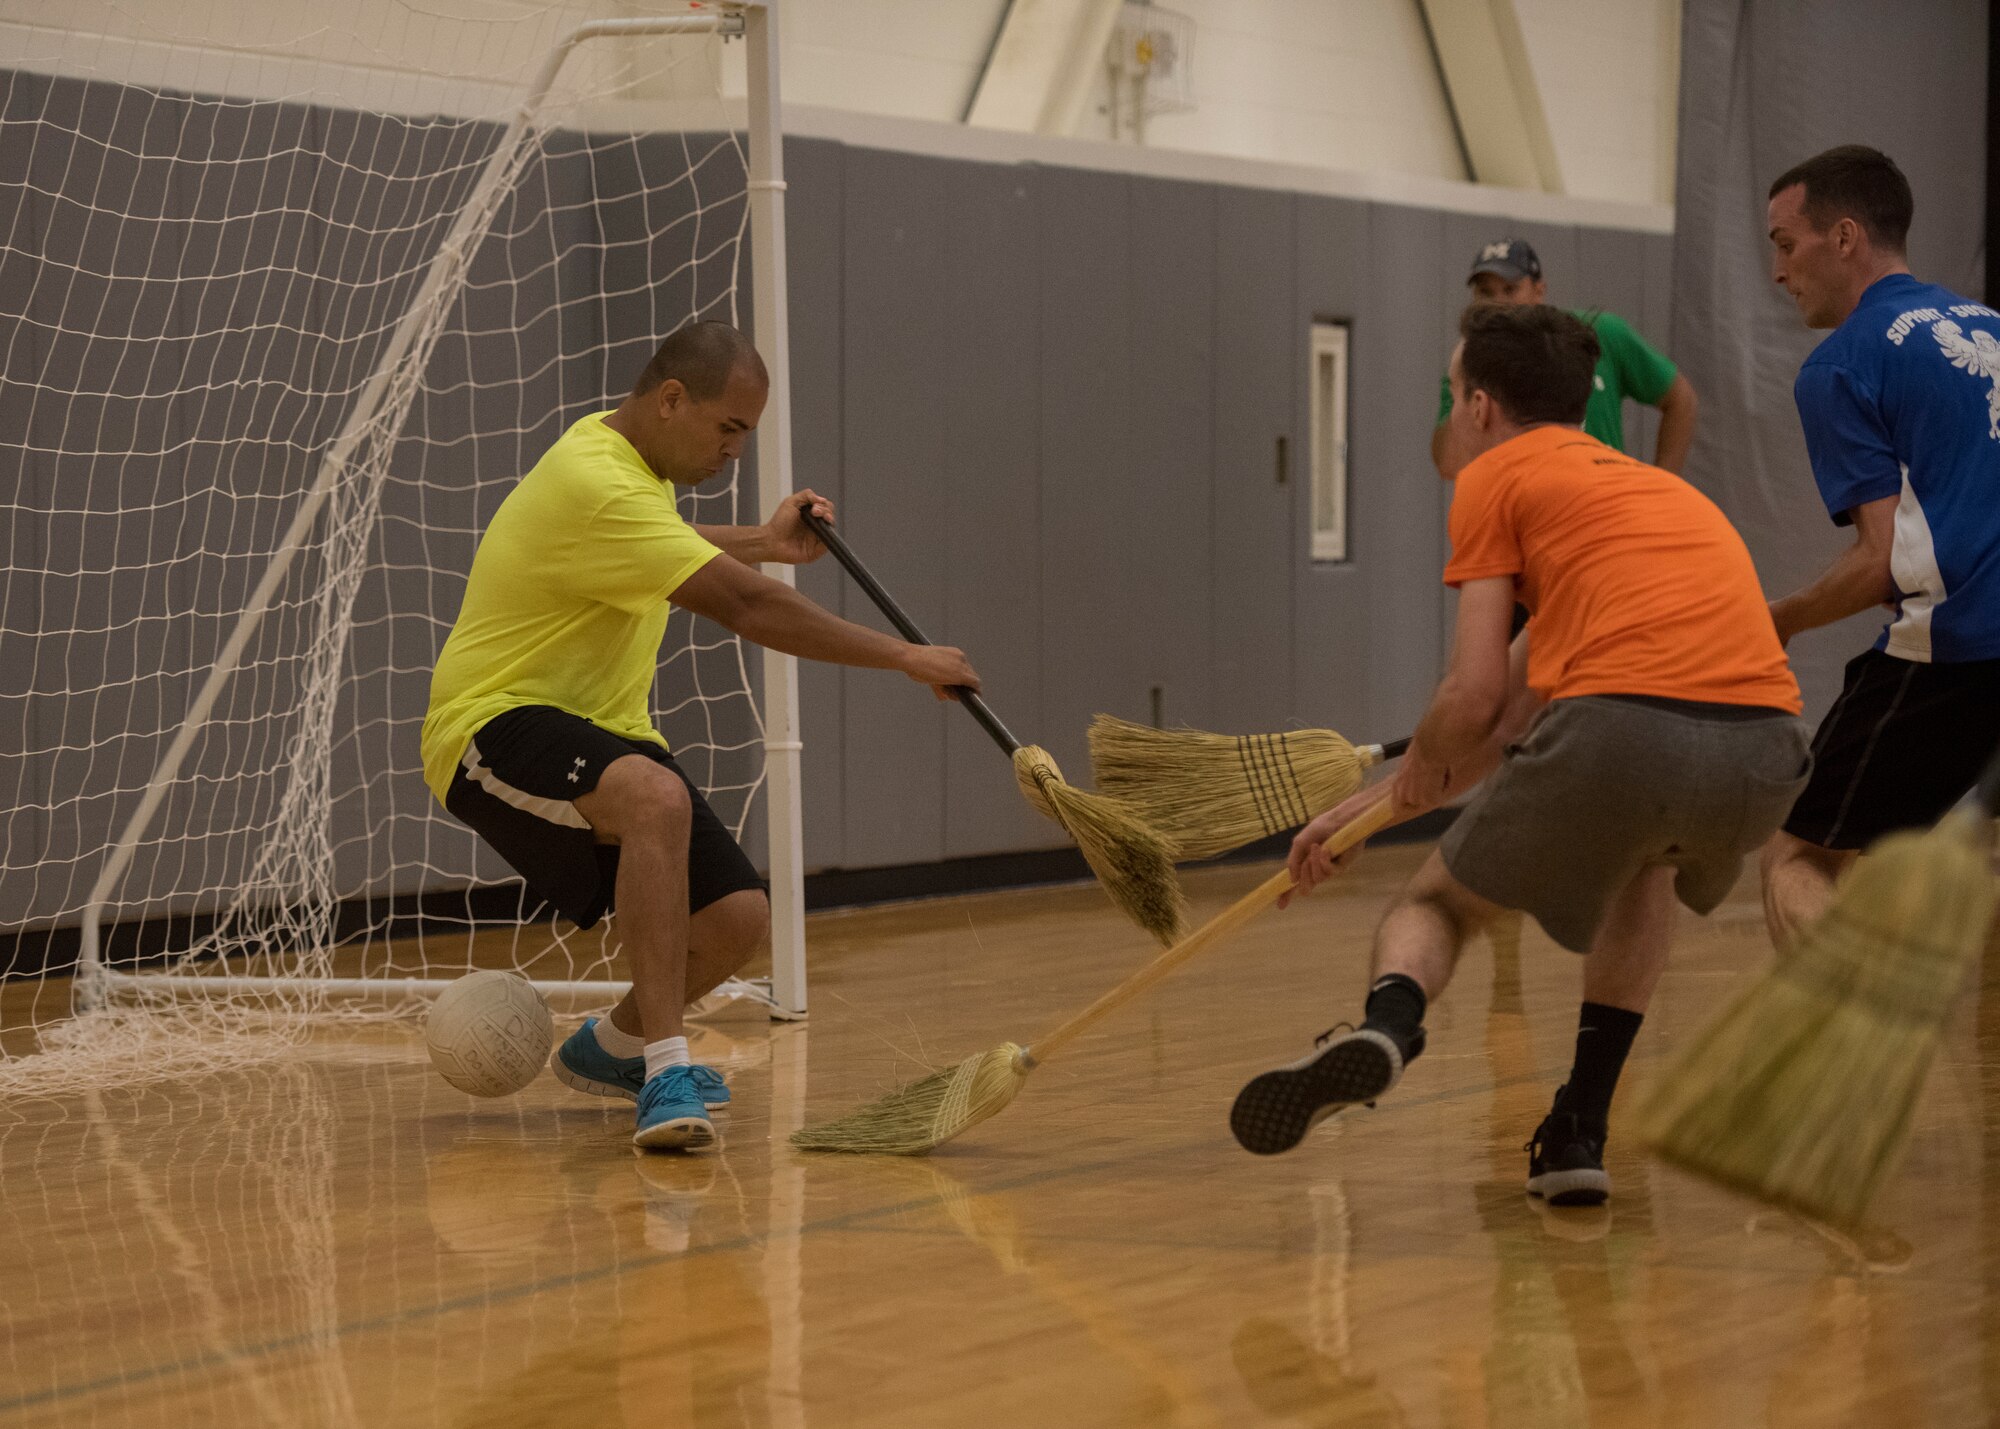 An airman from the 9th Airlift Squadron scores a goal June 14, 2019, at Dover Air Force Base, Del. Broomball is a close relative to hockey, the main difference being that it is played with brooms and a volleyball and not on ice. (U.S. Air Force photo by A1C Jonathan Harding)